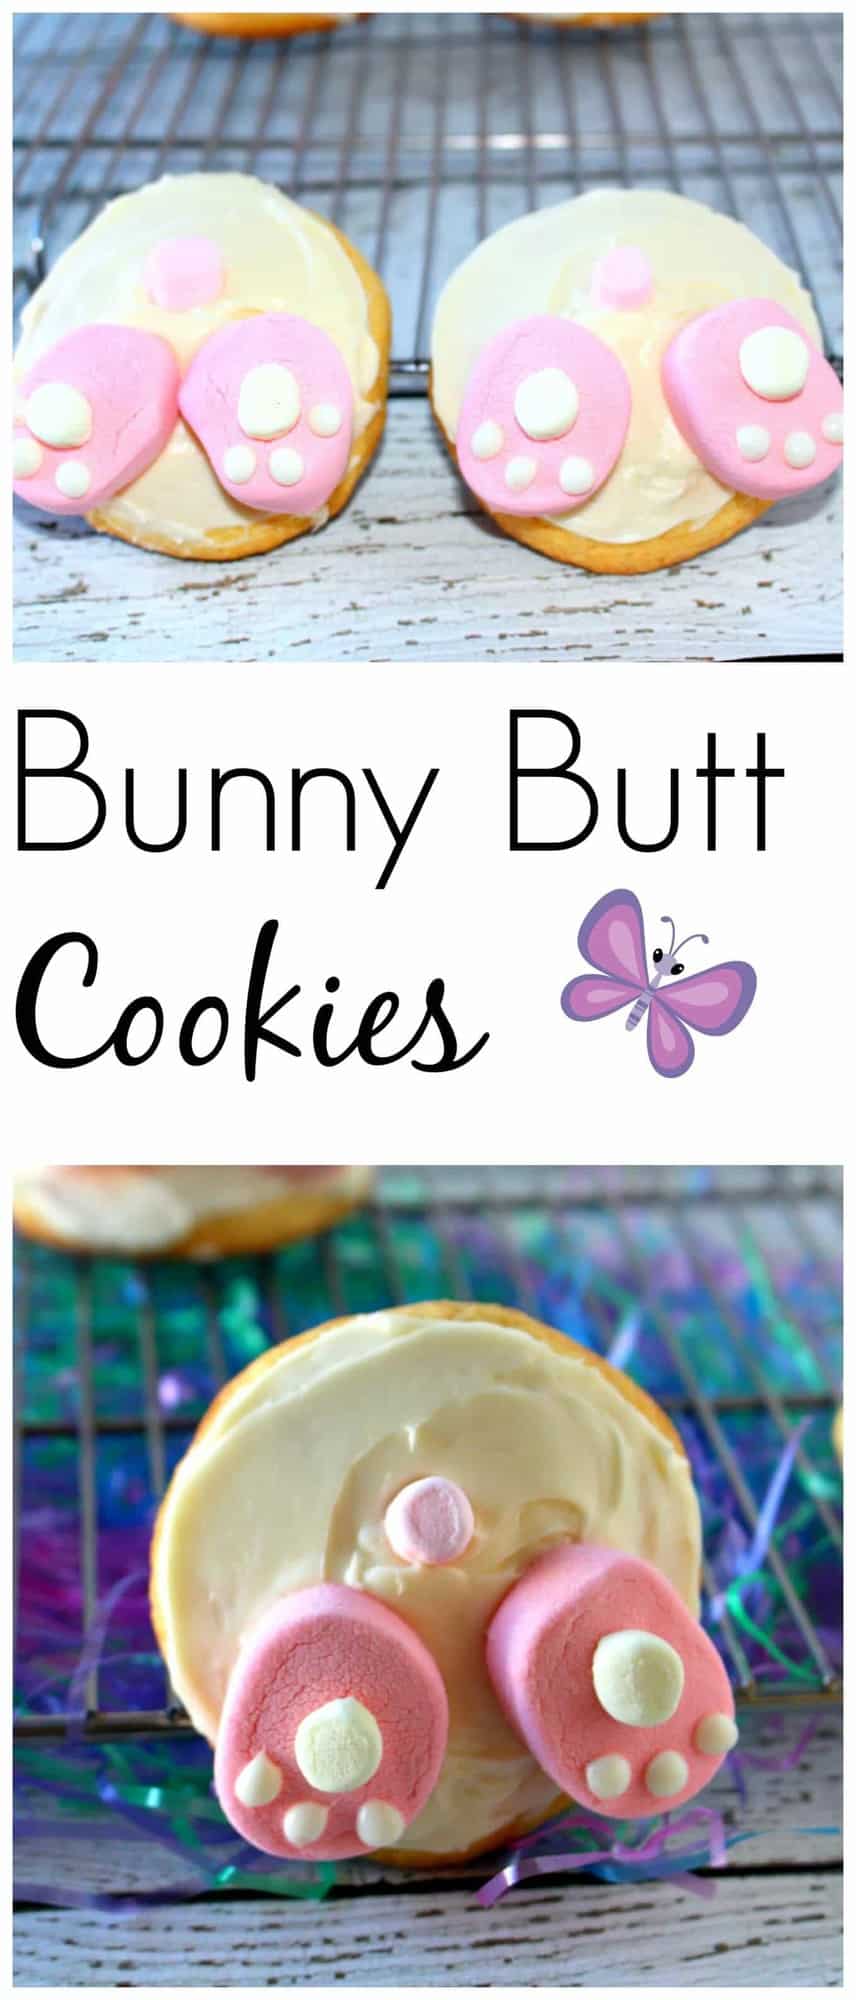 https://princesspinkygirl.com/wp-content/uploads/2015/03/Bunny-Butt-Cookies-fun-to-make-with-the-kids.jpg